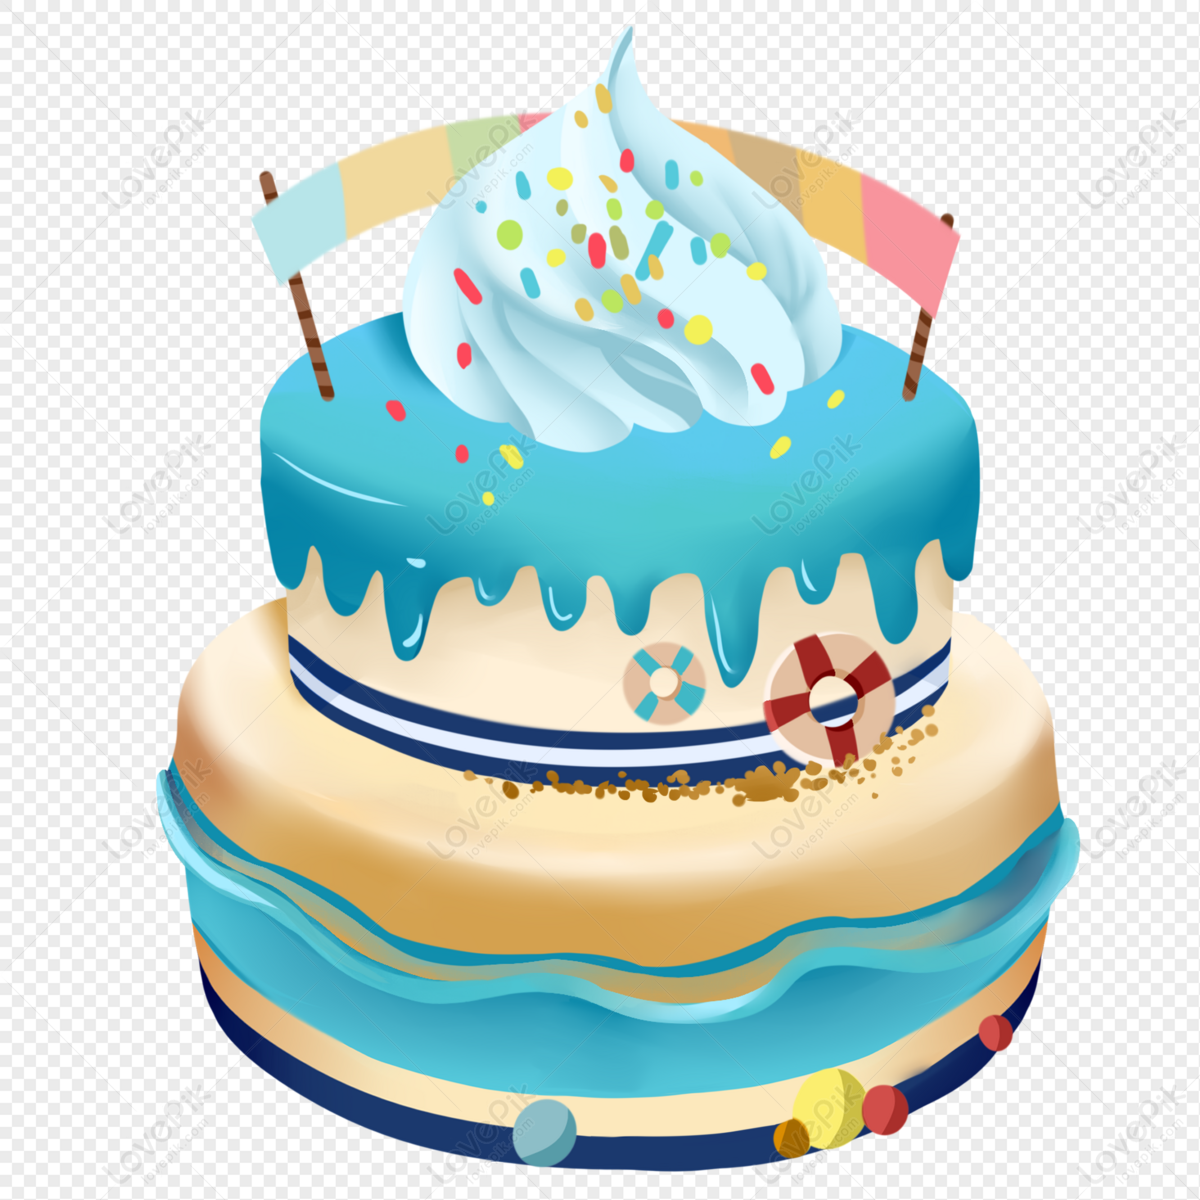 Birthday Cake PNG Clipart Image​ | Gallery Yopriceville - High-Quality Free  Images and Transparent PNG Clipart